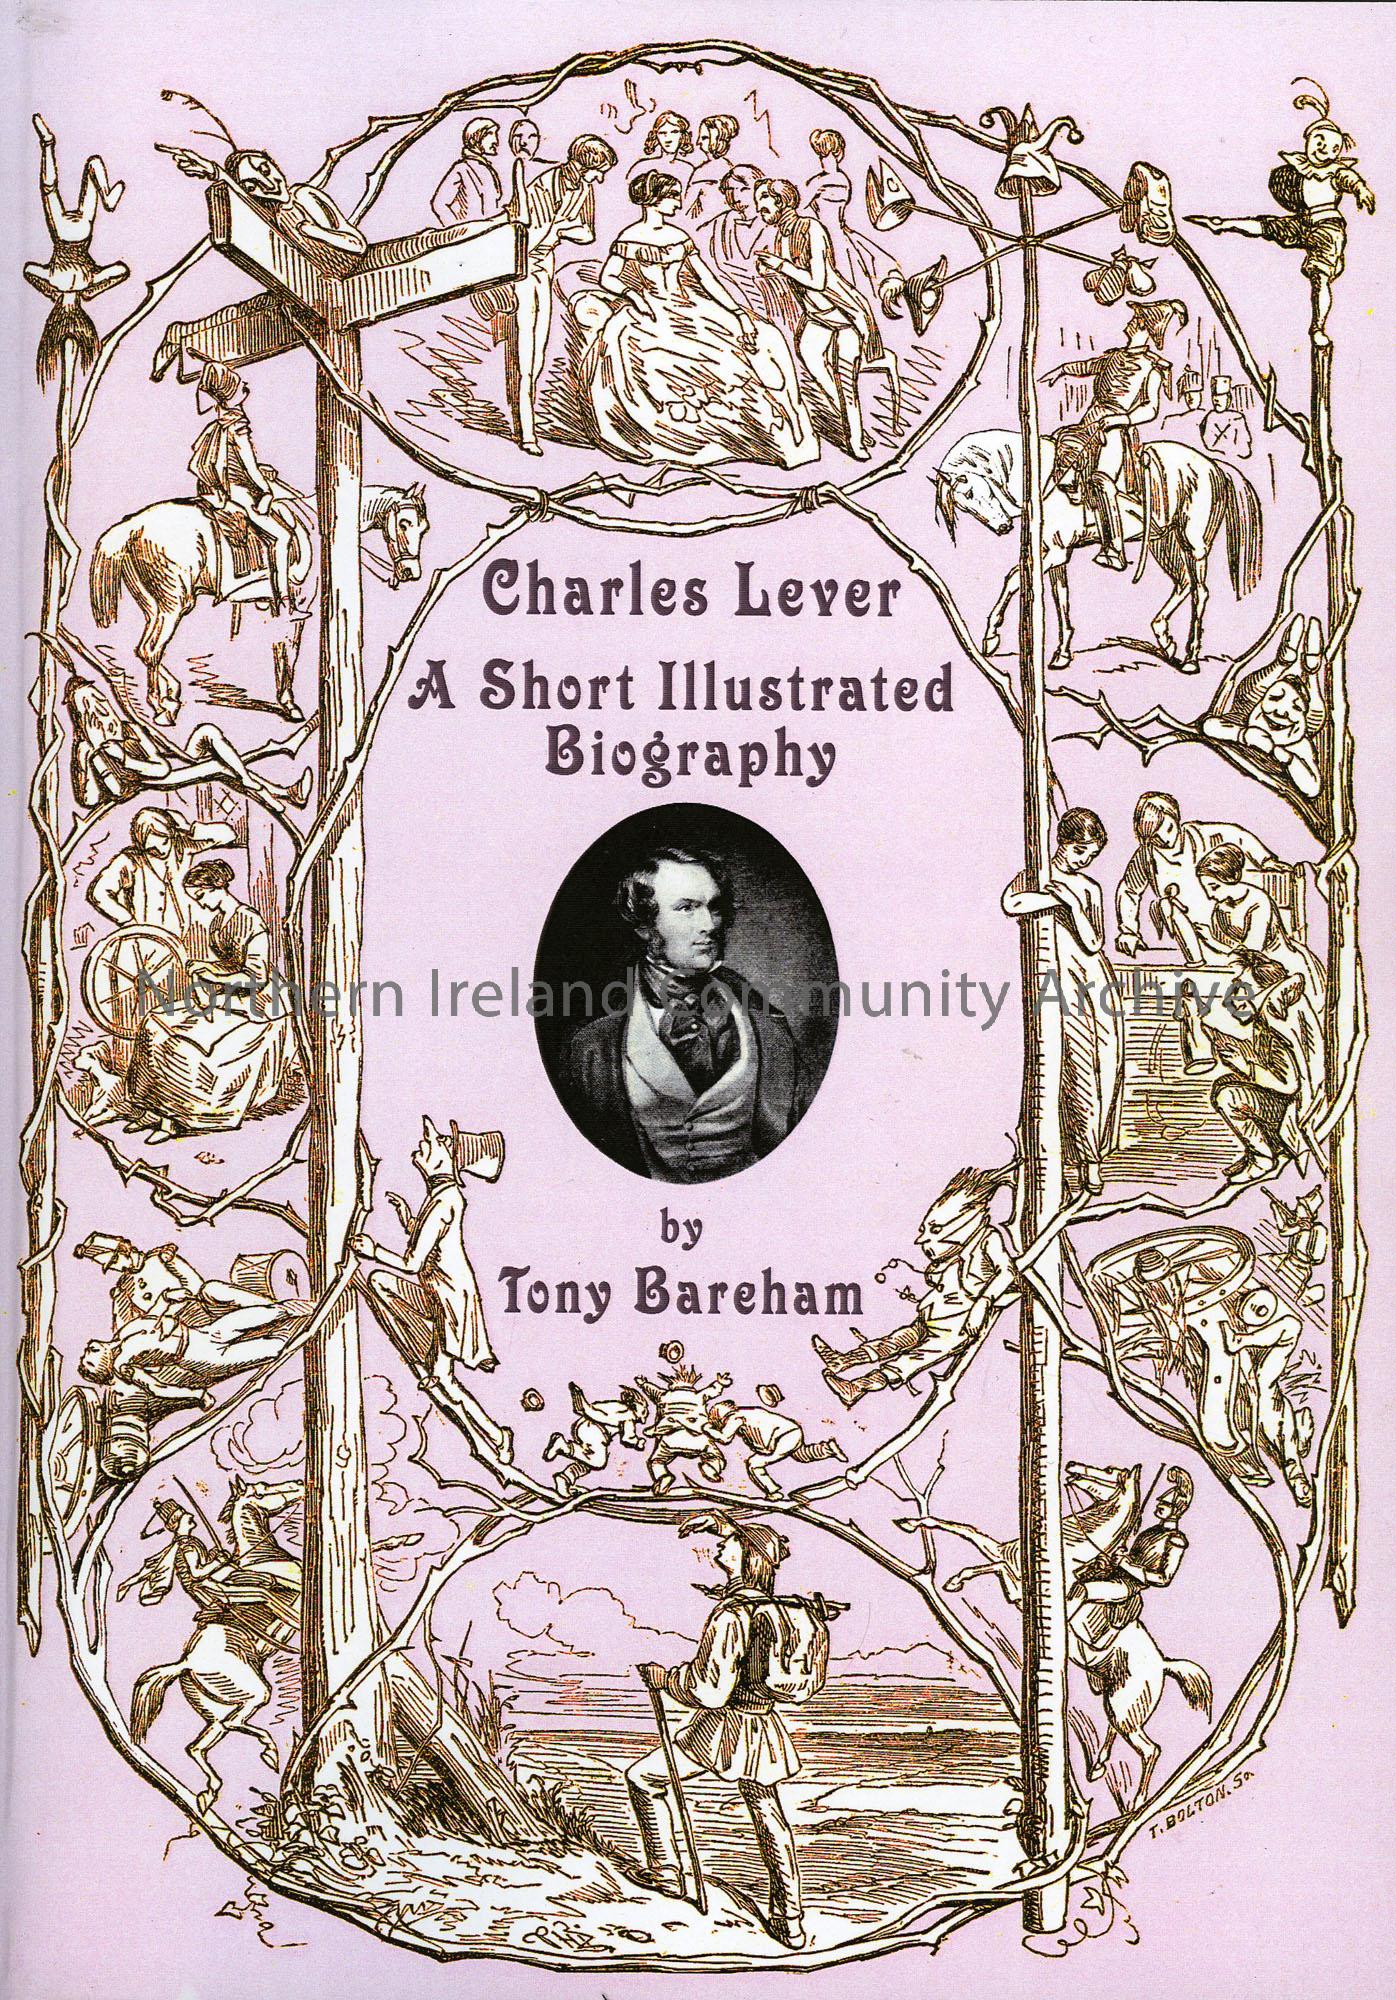 Charles Lever: A Short Illustrated Biography by Tony Bareham (3459)